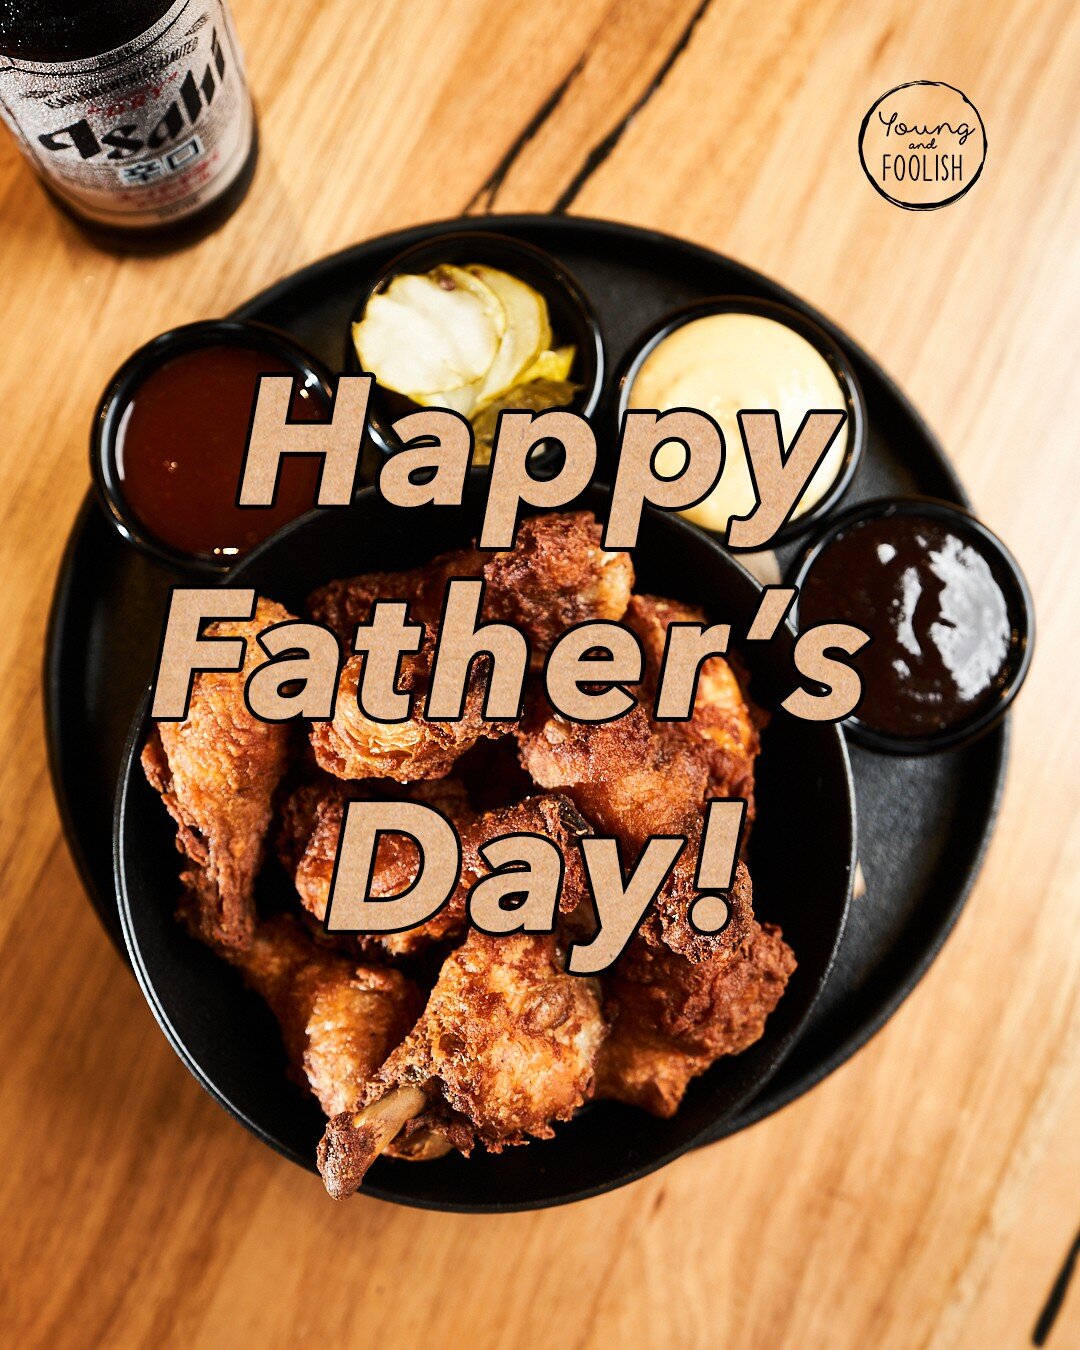 Lot's of love to all the Dad's today!  It's your special day &amp; we can't wait to spoil you all for breakfast, lunch and DINNER.  Open now and until late - tables still available after 5 PM.